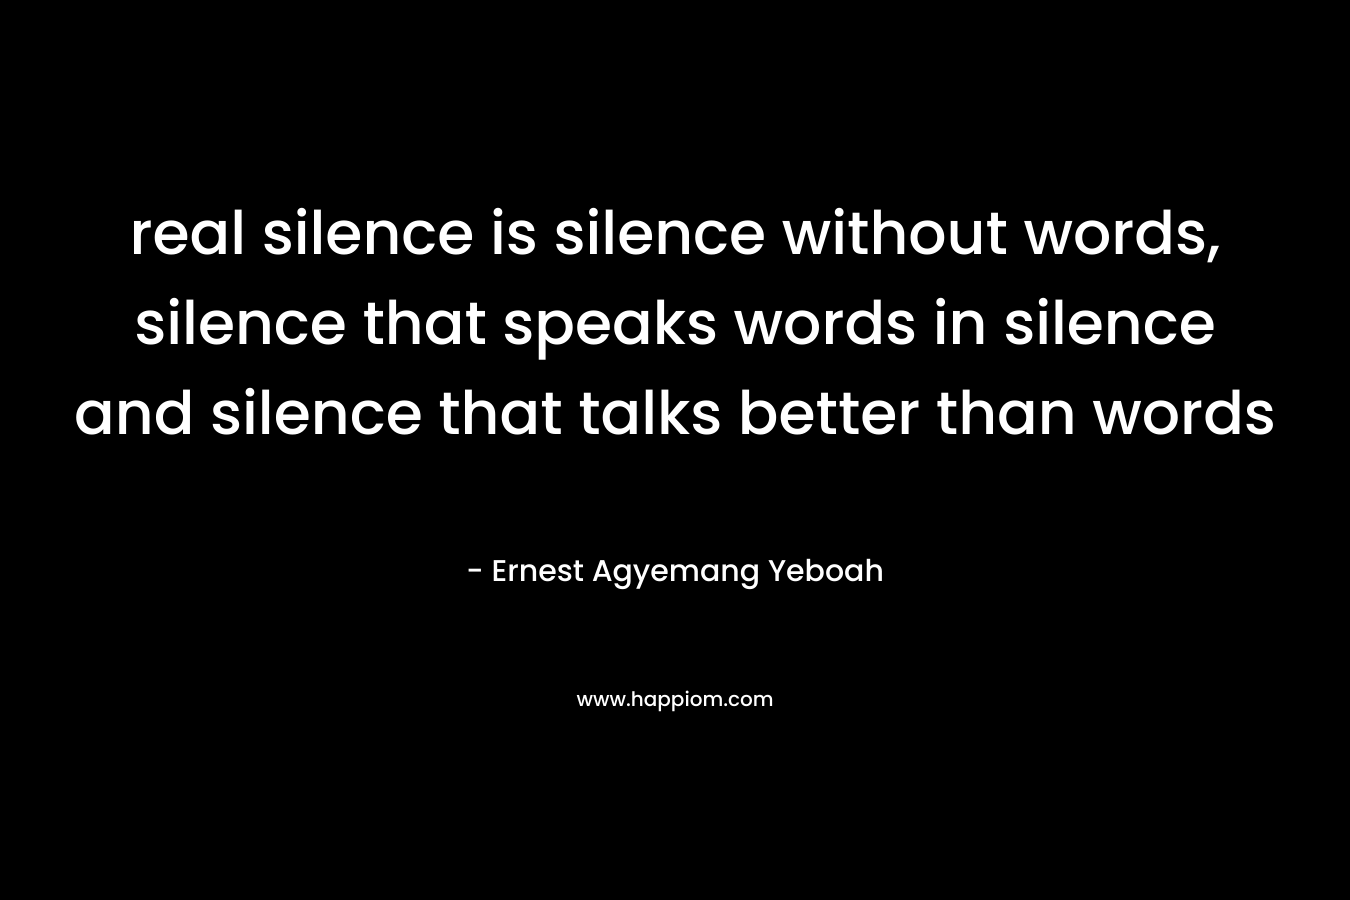 real silence is silence without words, silence that speaks words in silence and silence that talks better than words